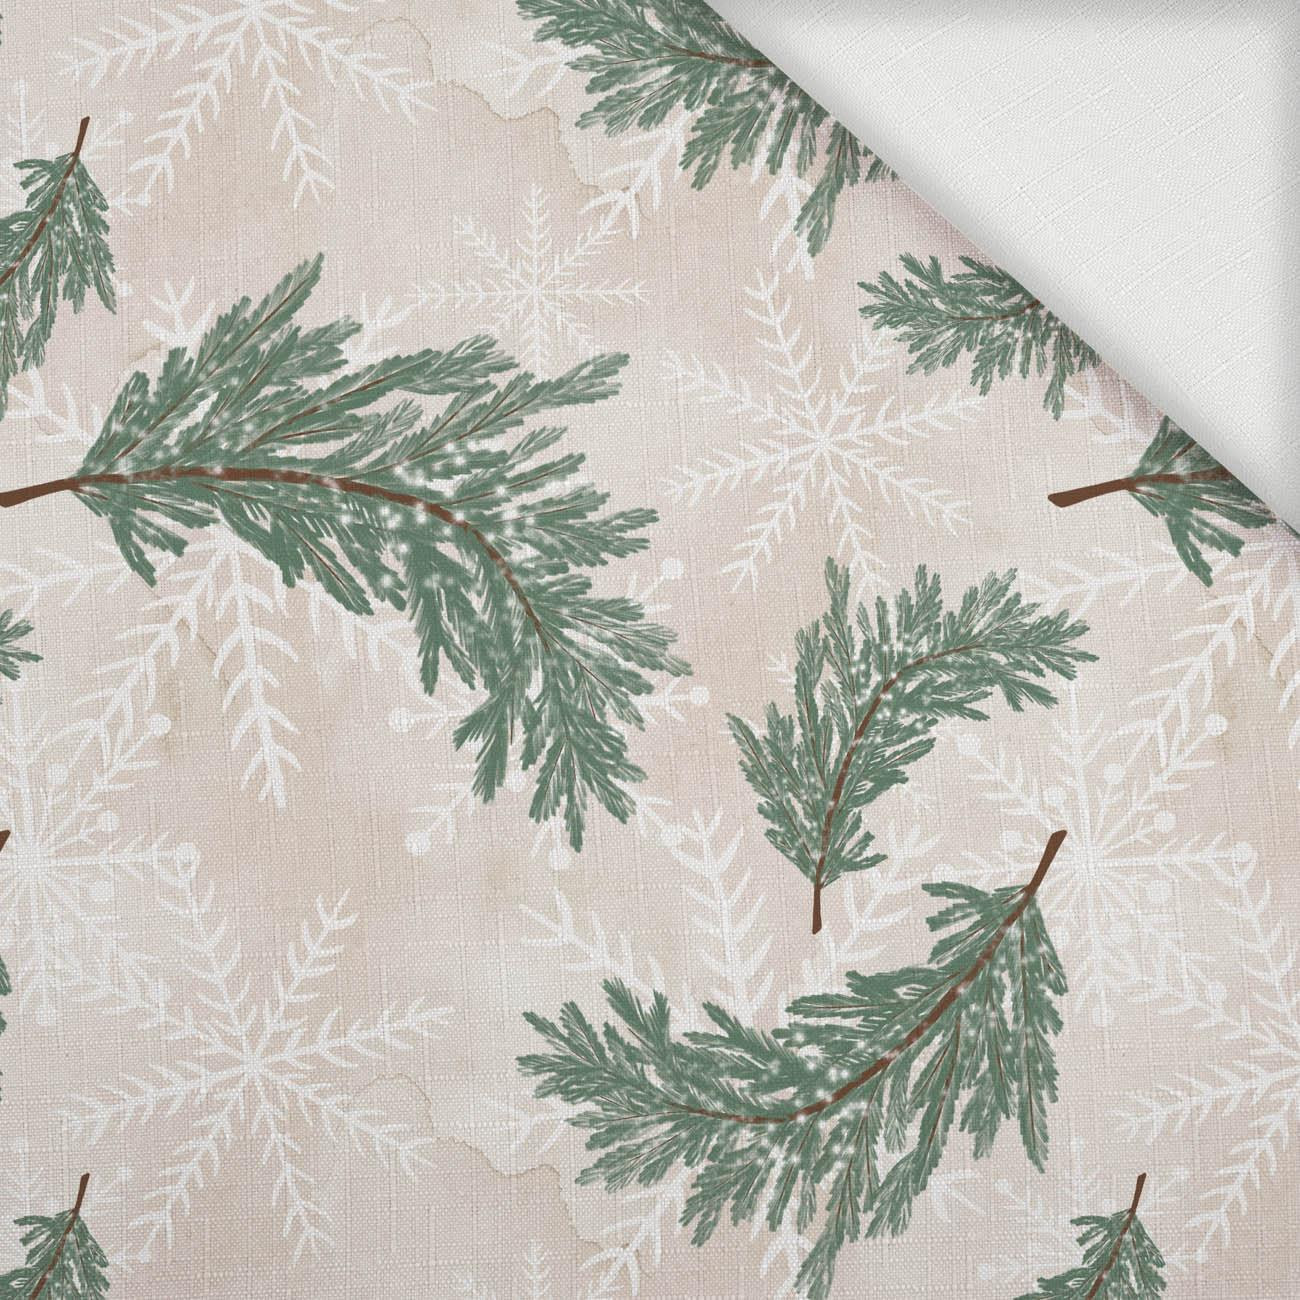 TWIGS AND SNOWFLAKES (WINTER IN THE CITY) - Woven Fabric for tablecloths